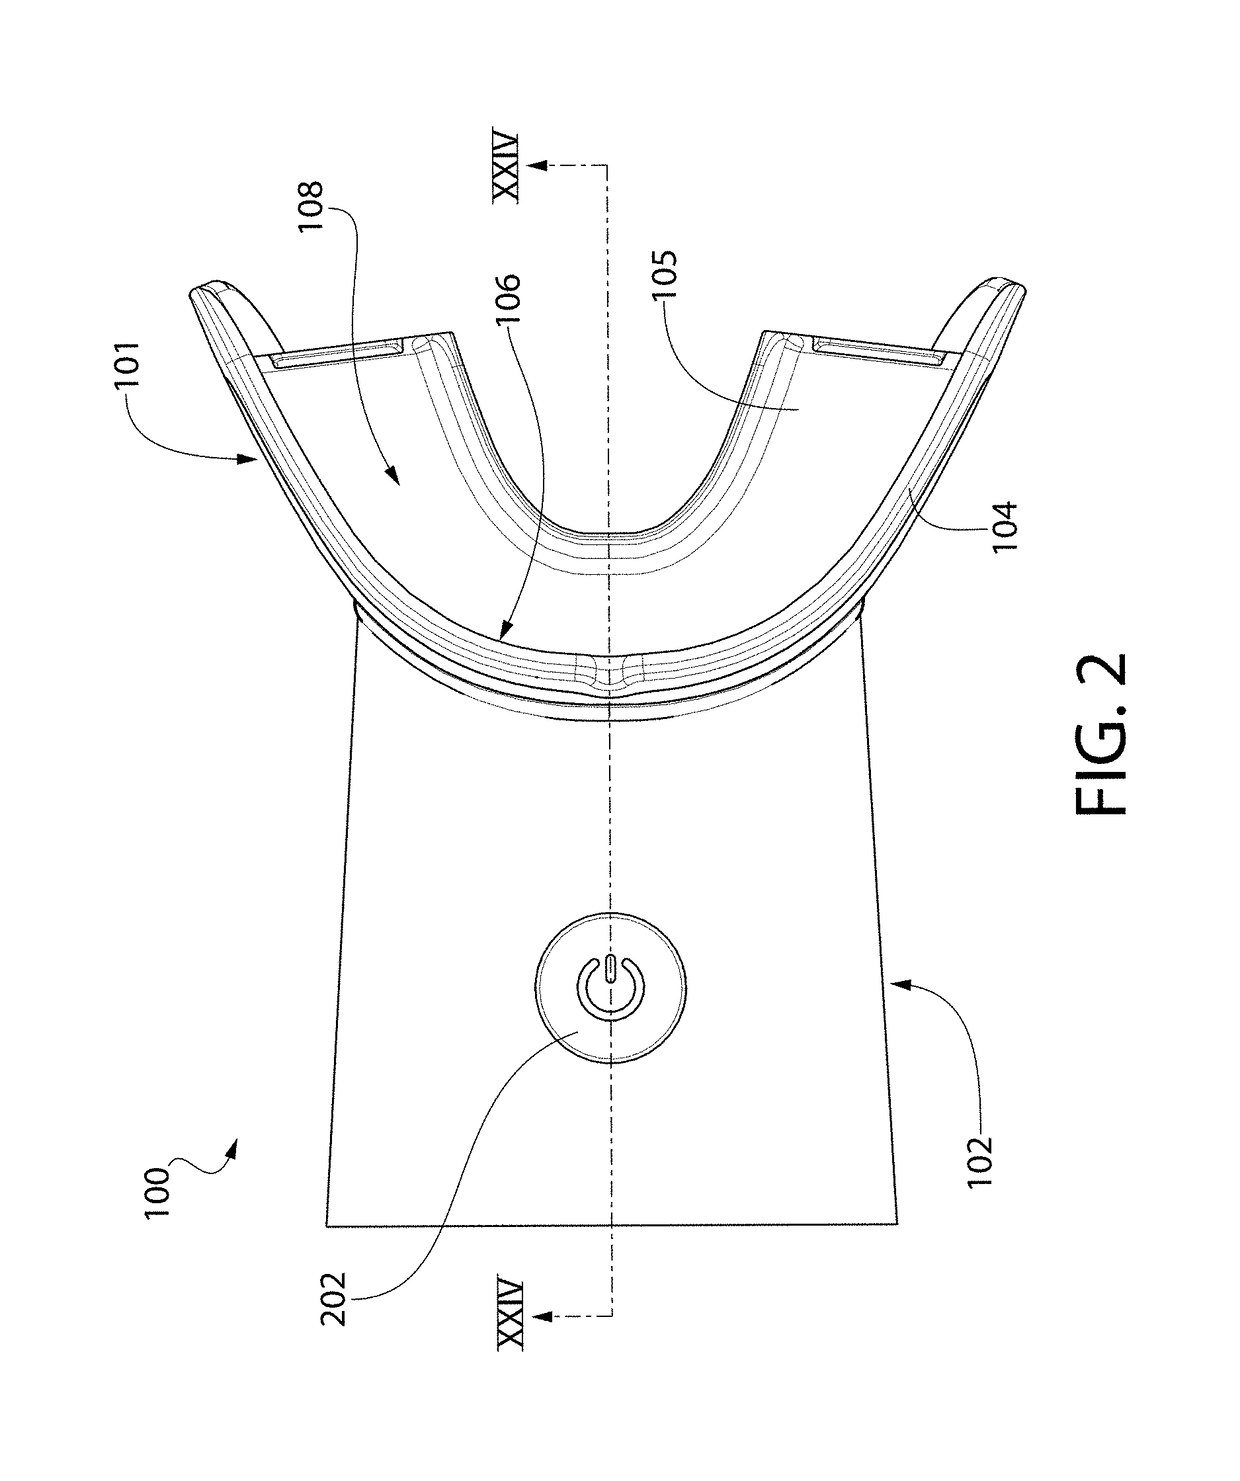 Oral treatment device